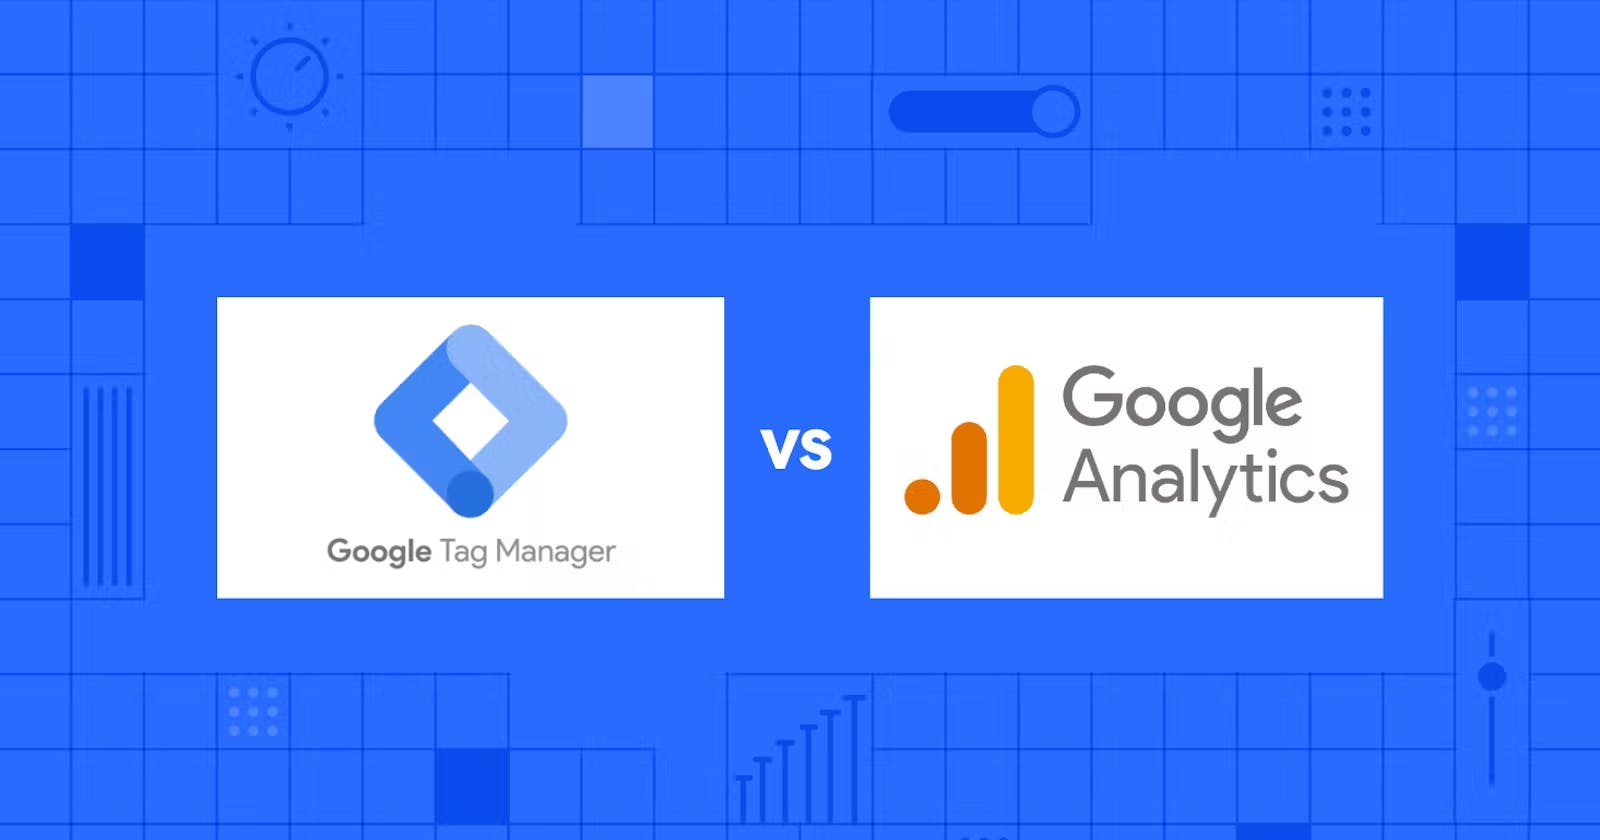 Google Tag Manager vs Google Analytics: Key Differences